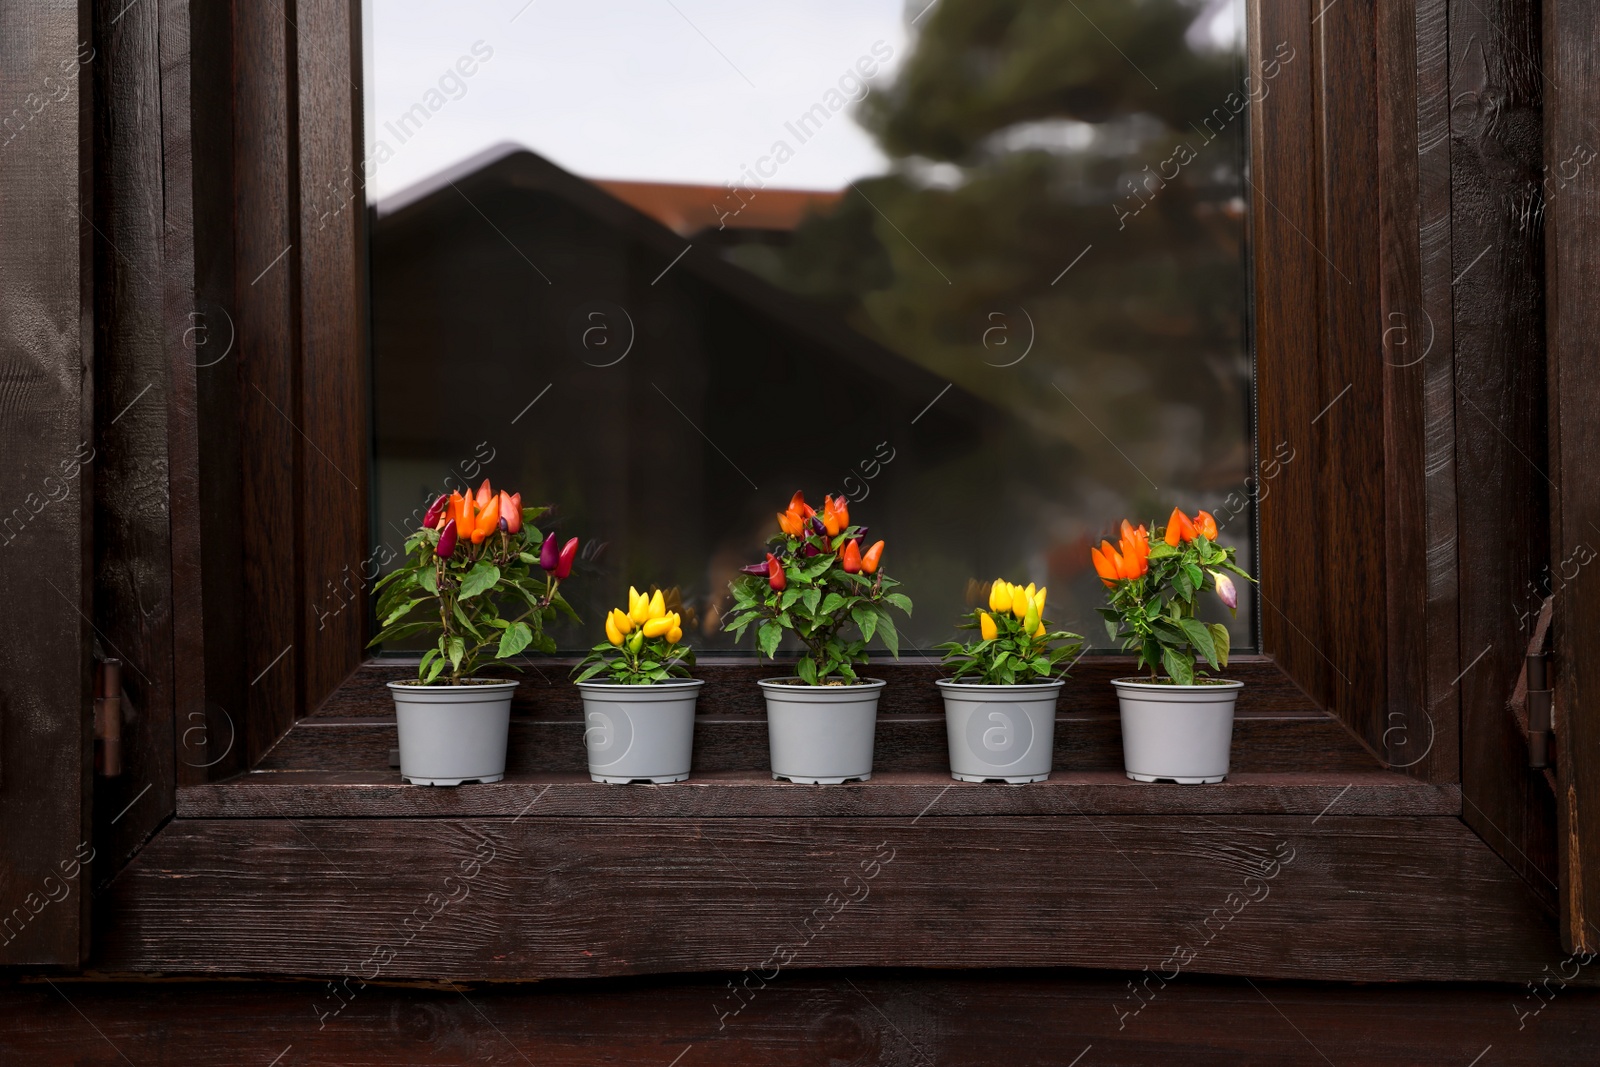 Photo of Capsicum Annuum plants. Many potted rainbow multicolor and yellow chili peppers near window outdoors